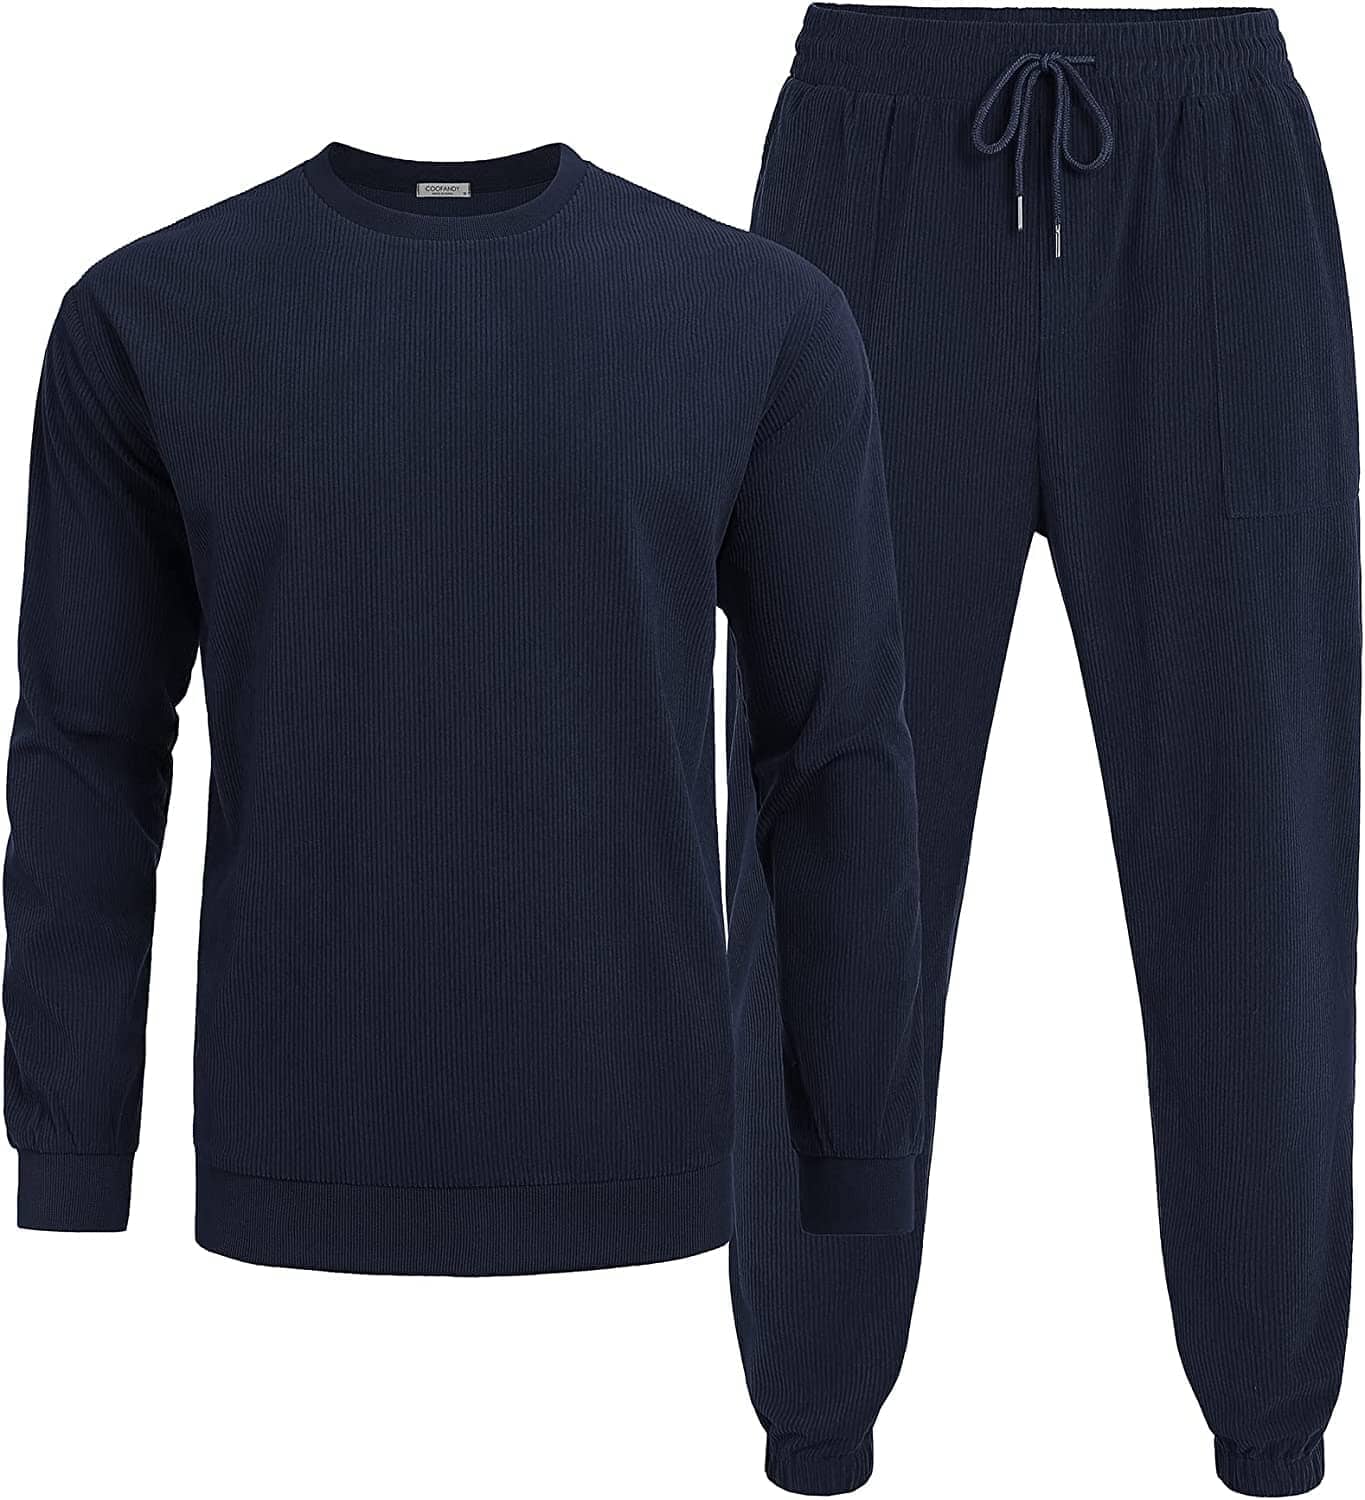 2 Piece Long Sleeve Pullover Sports Sets (US Only) Sports Set Coofandy's Navy Blue S 